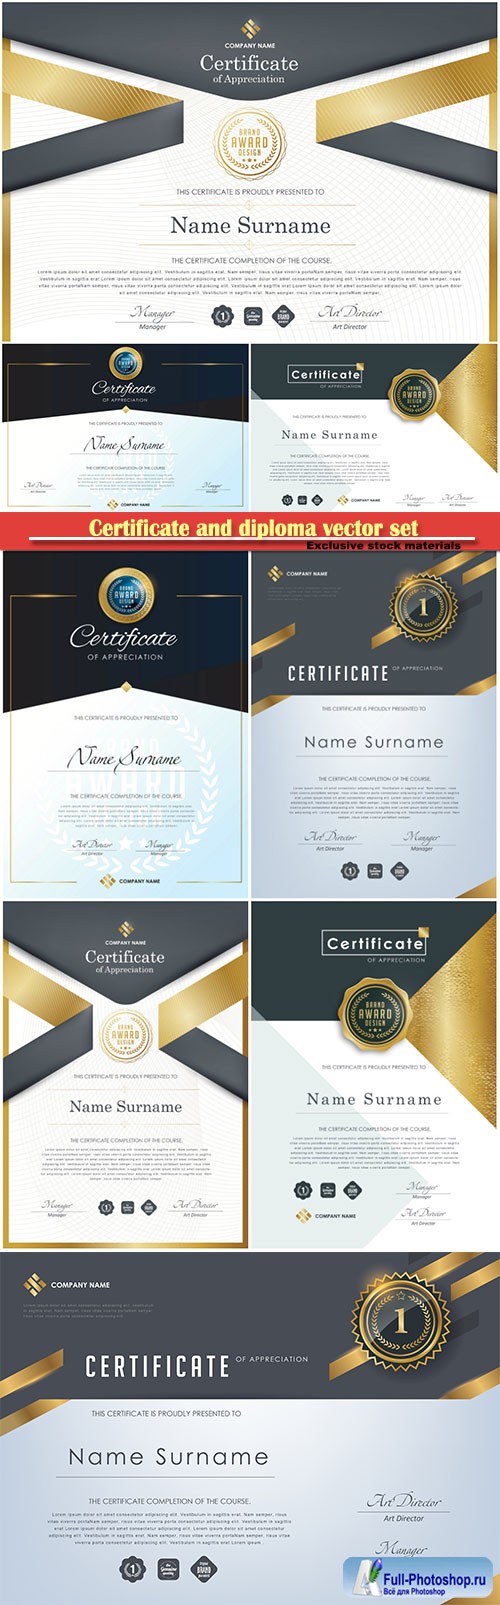 Certificate and diploma vector set # 5